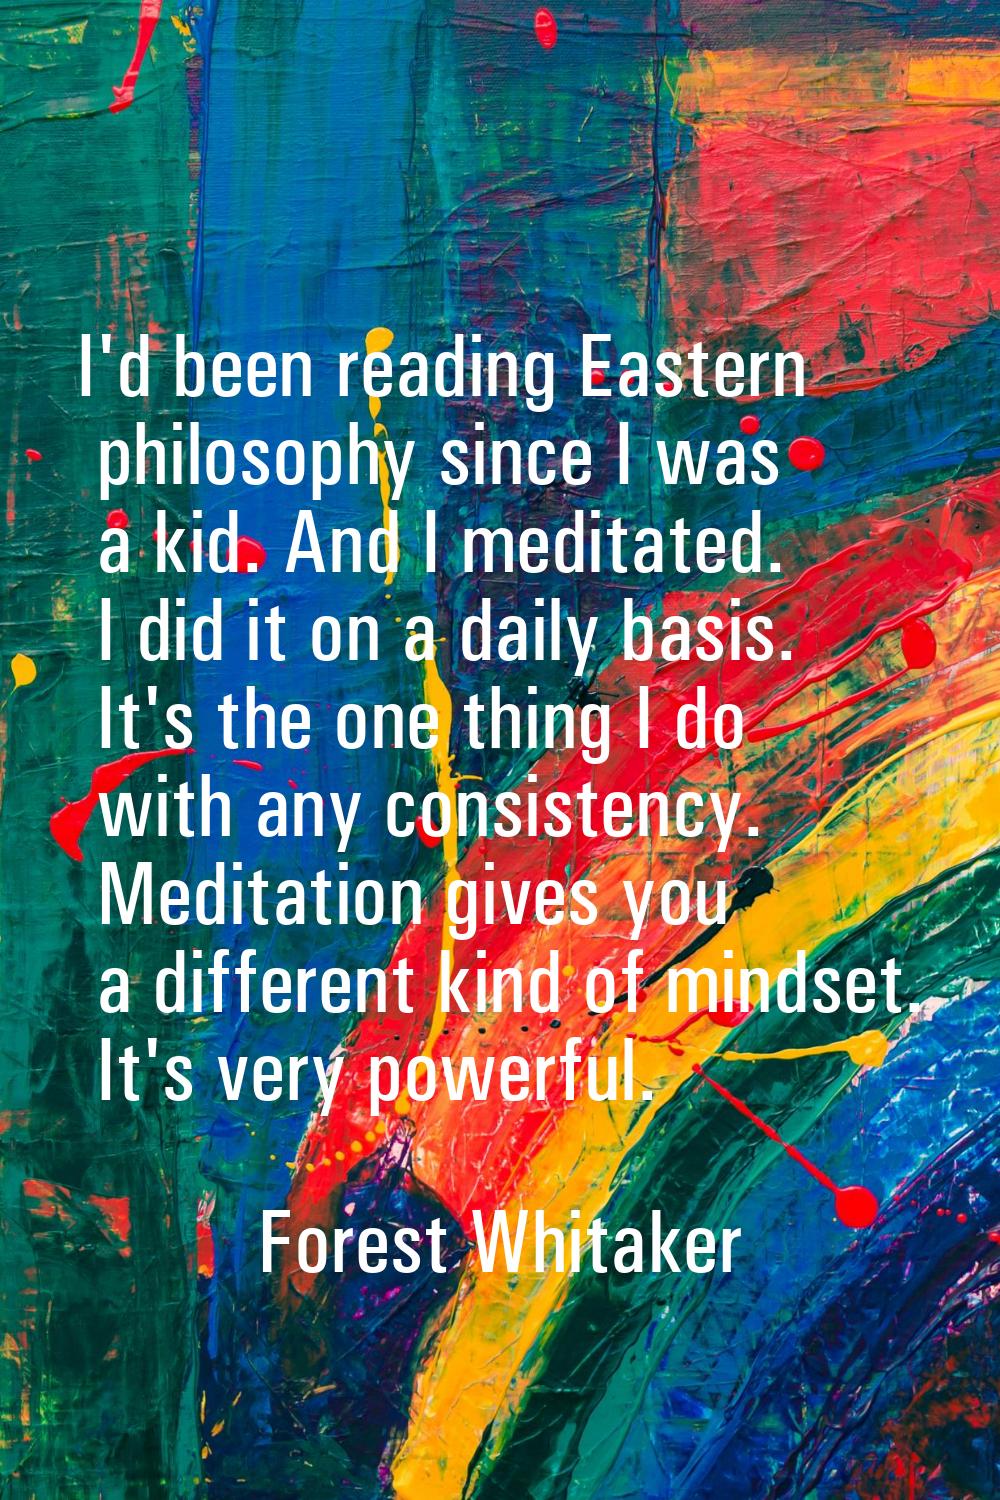 I'd been reading Eastern philosophy since I was a kid. And I meditated. I did it on a daily basis. 